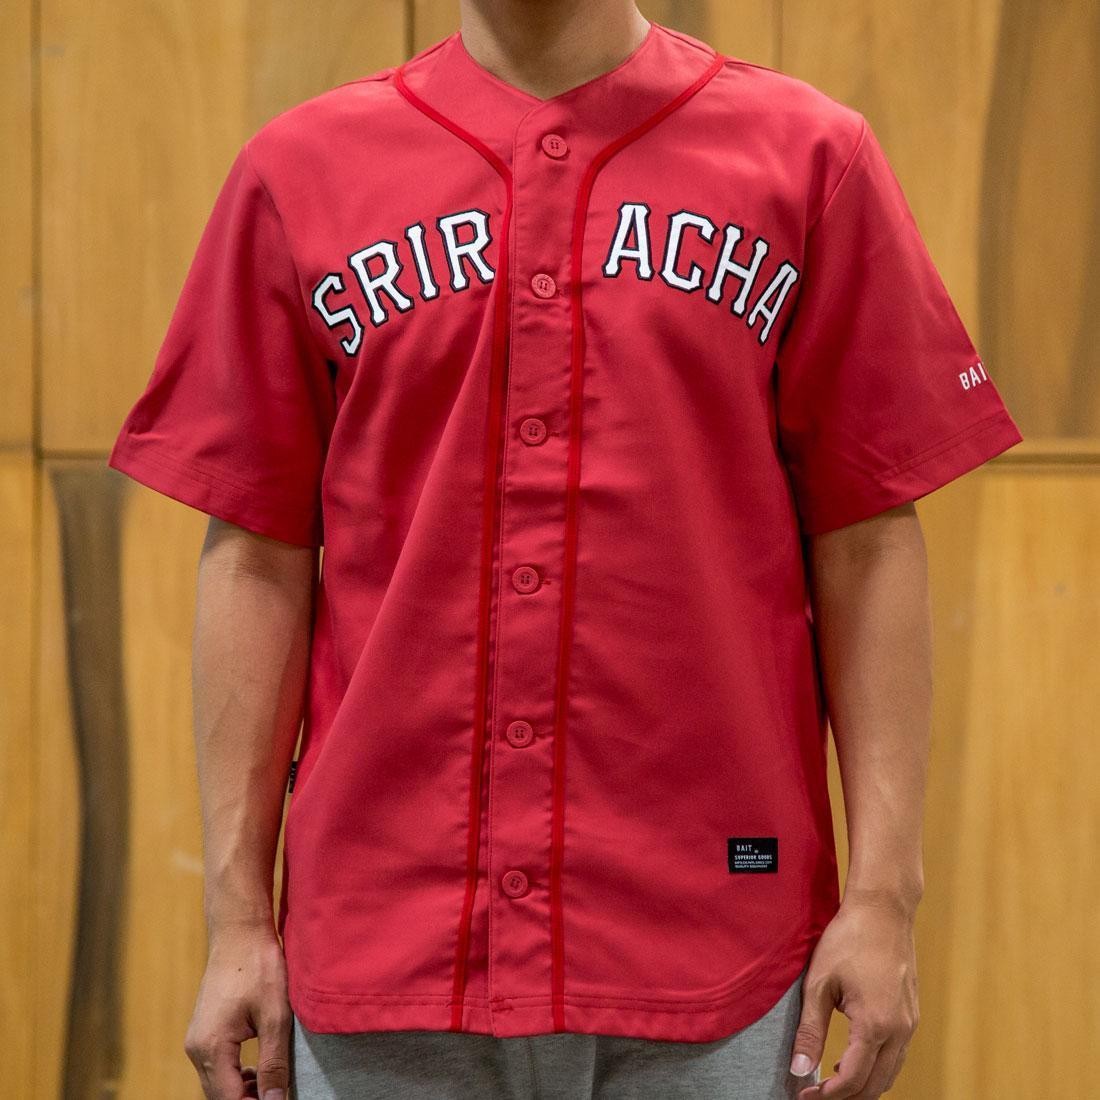 all red baseball jersey